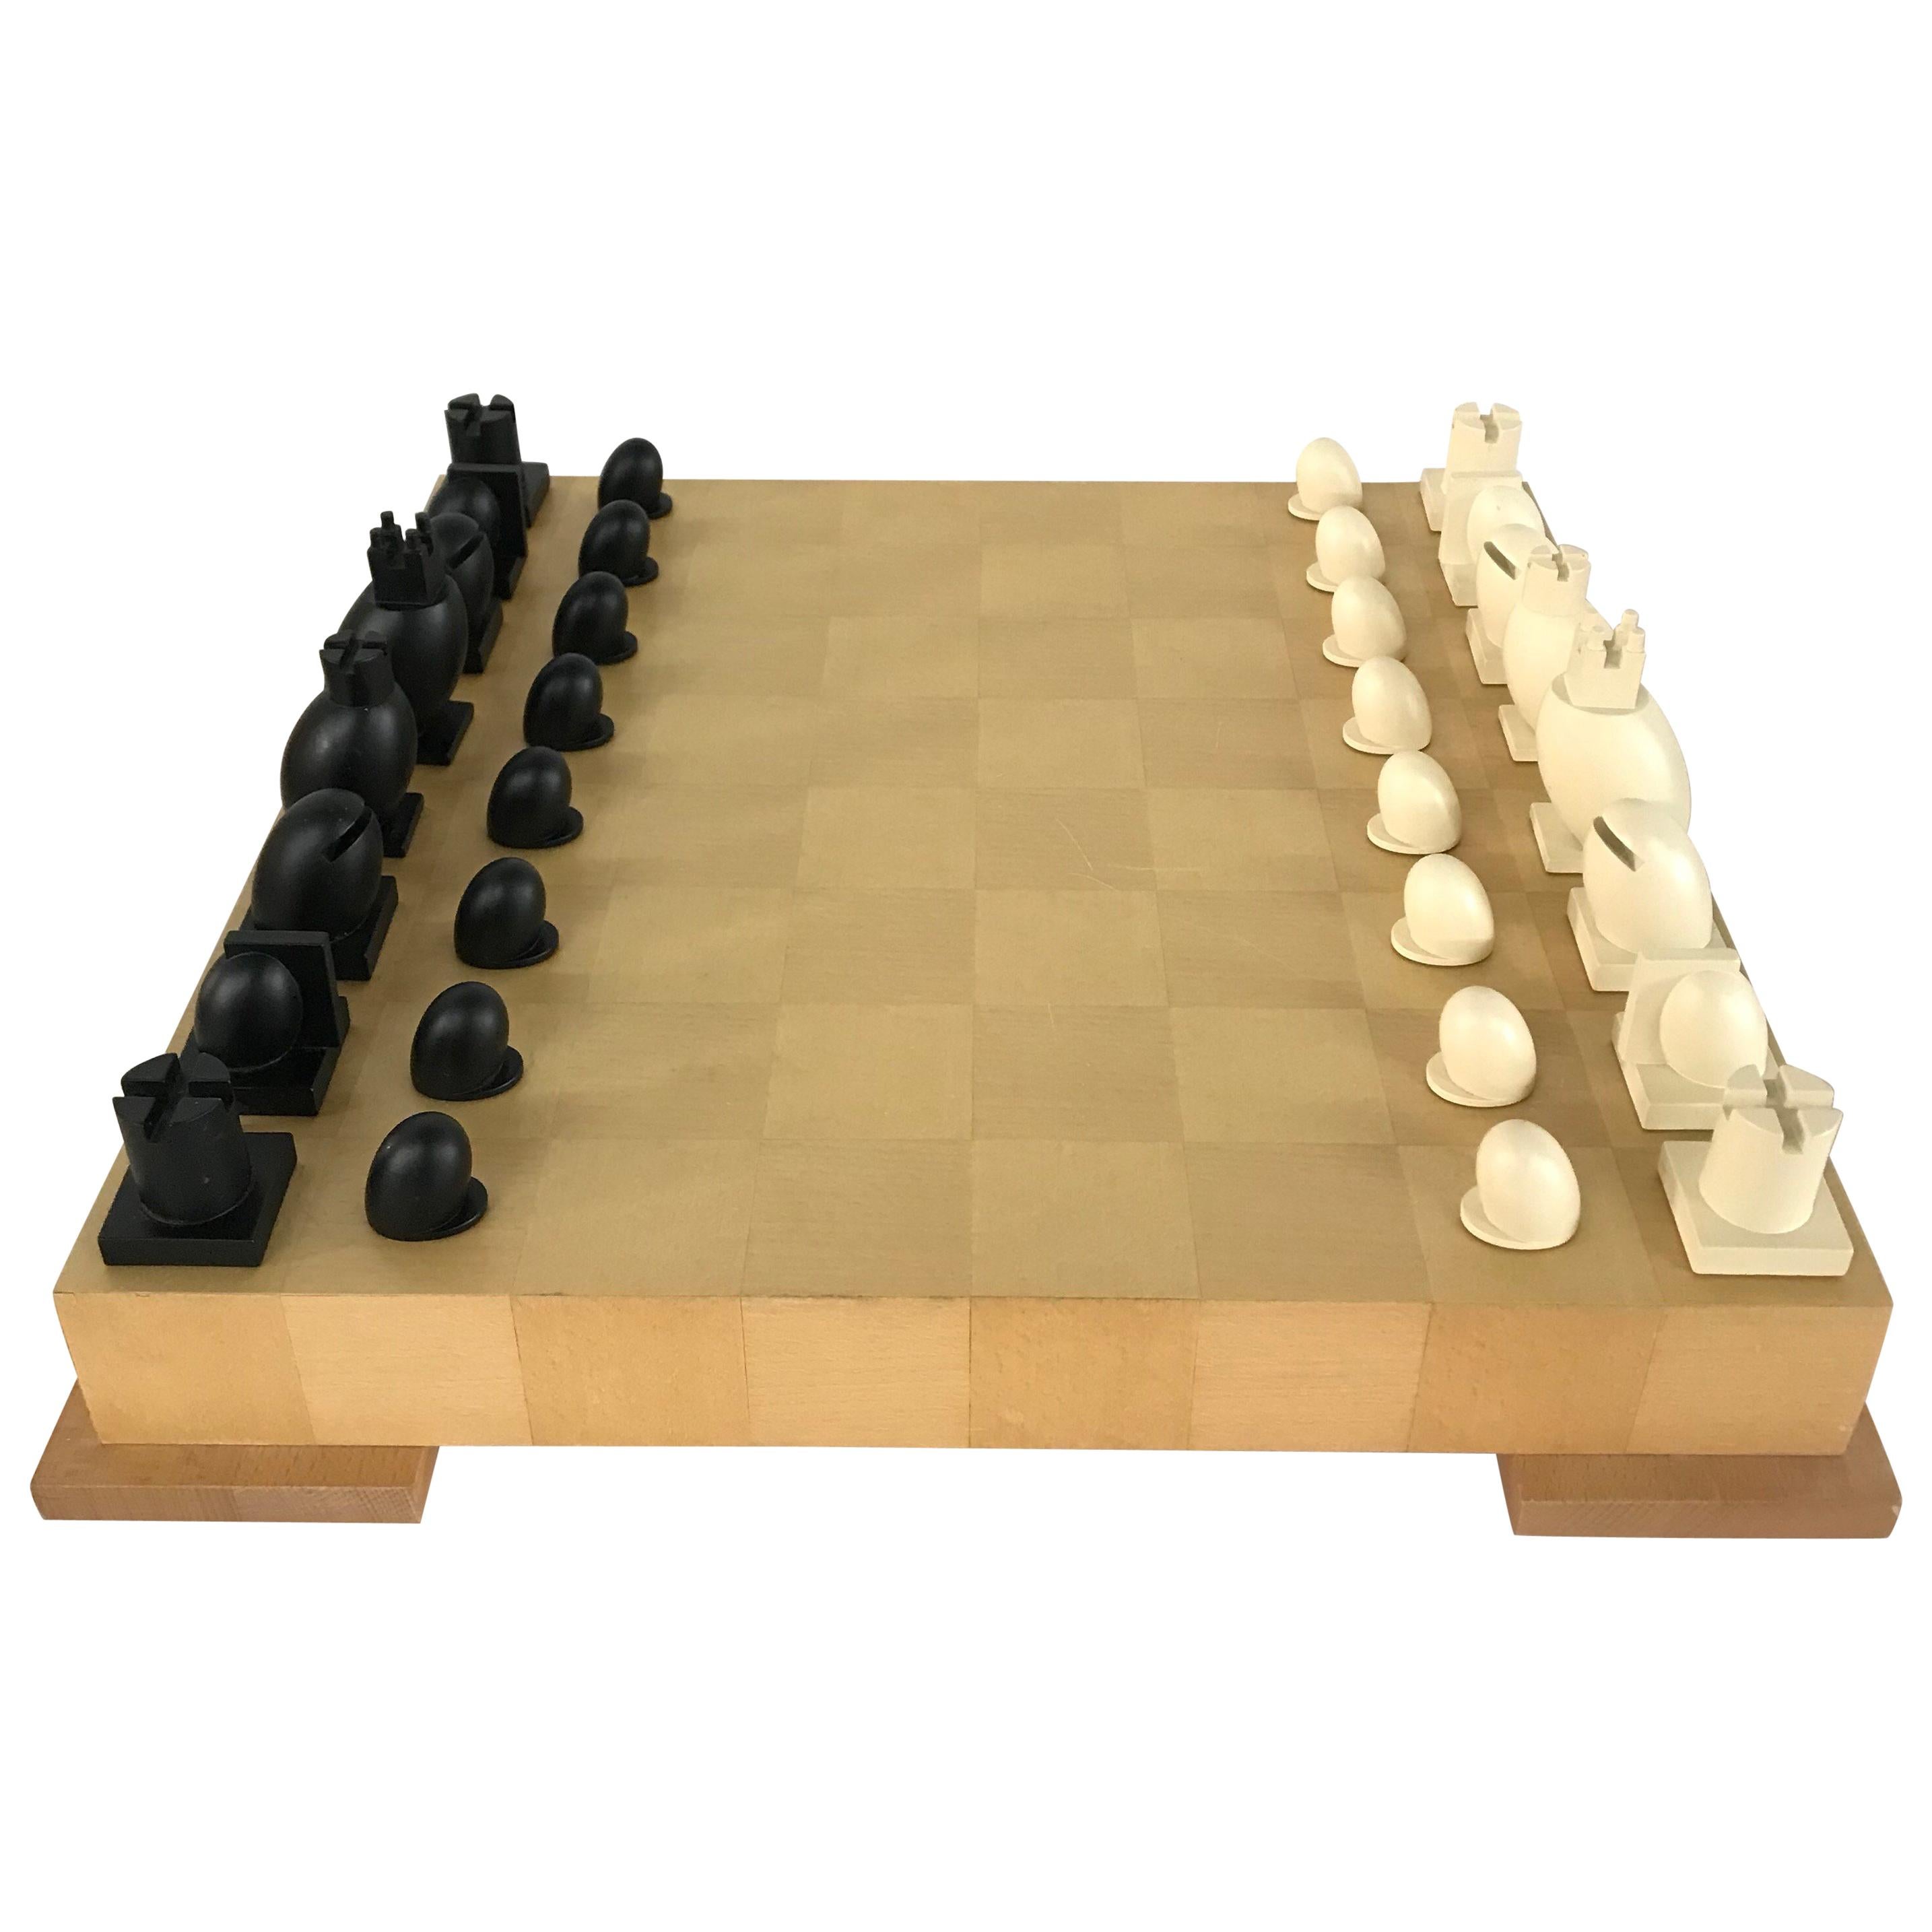 Michael Graves Postmodern Chess and Checkers Set, Signed